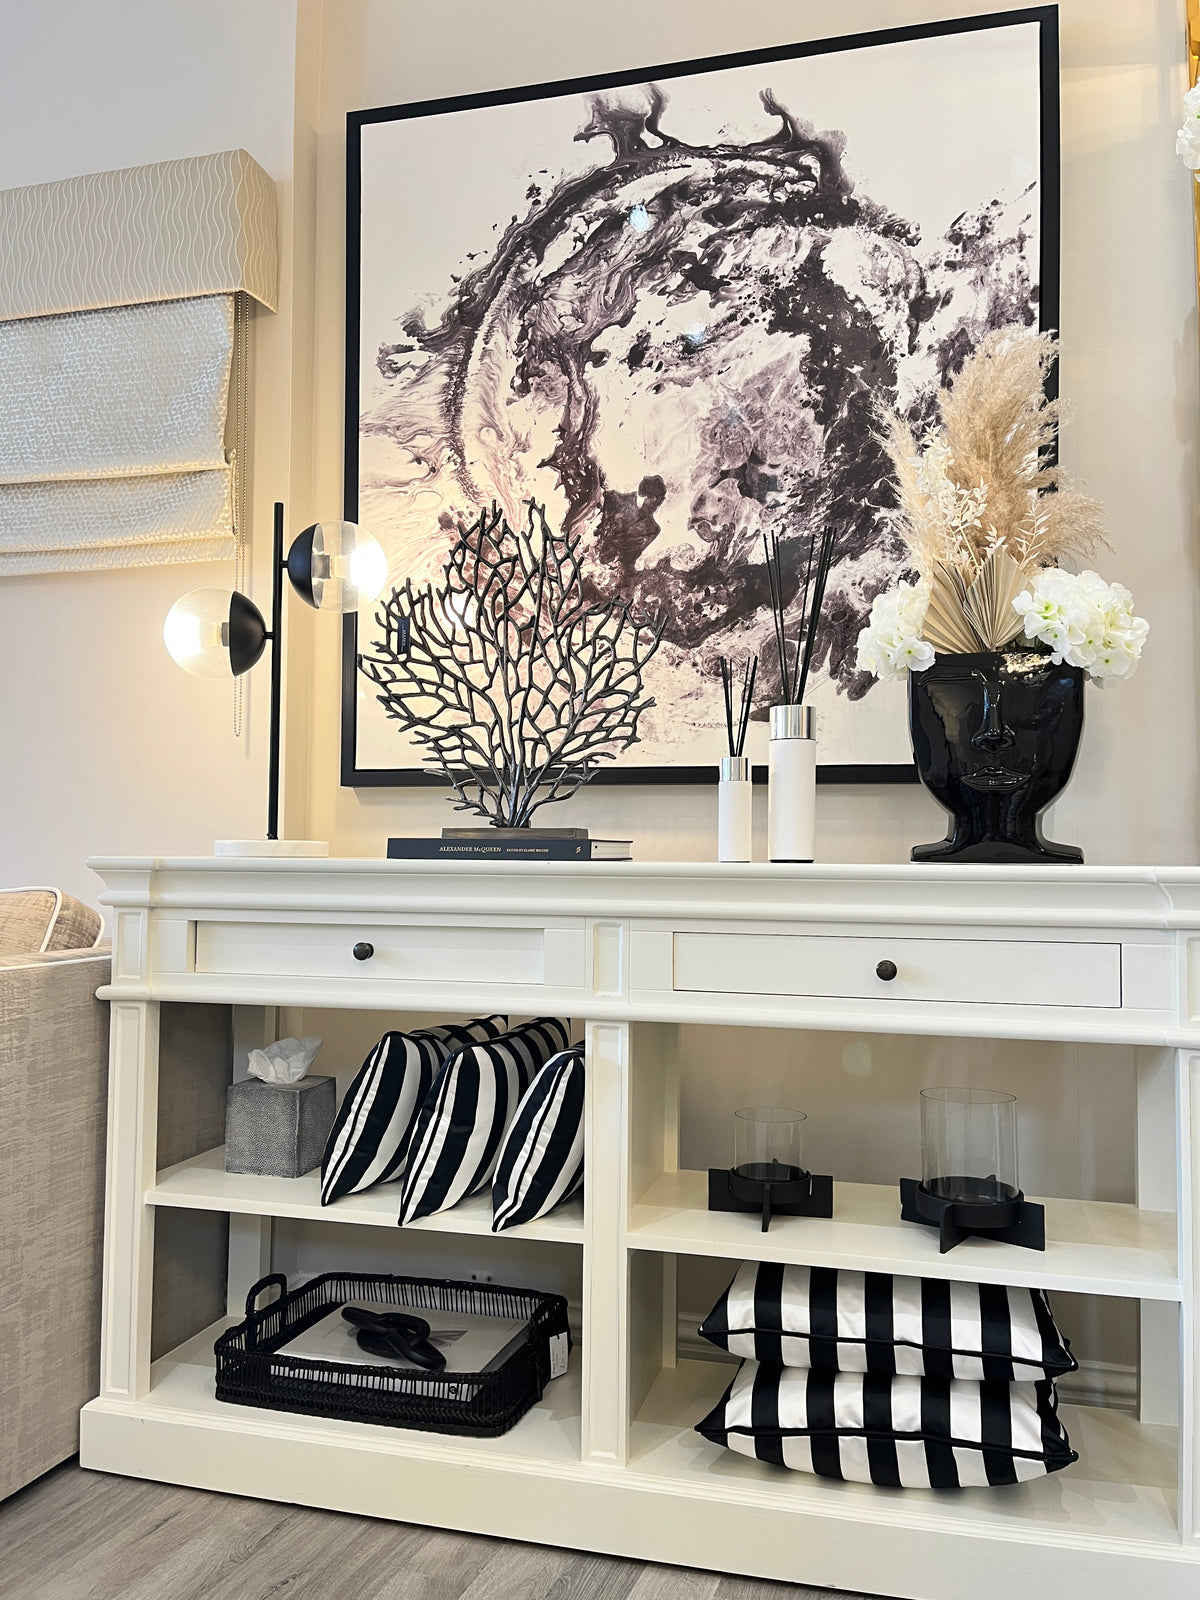 Monochrome home interiors. White console table with black home accessories, pampas grass, rattan chair and coffee table books